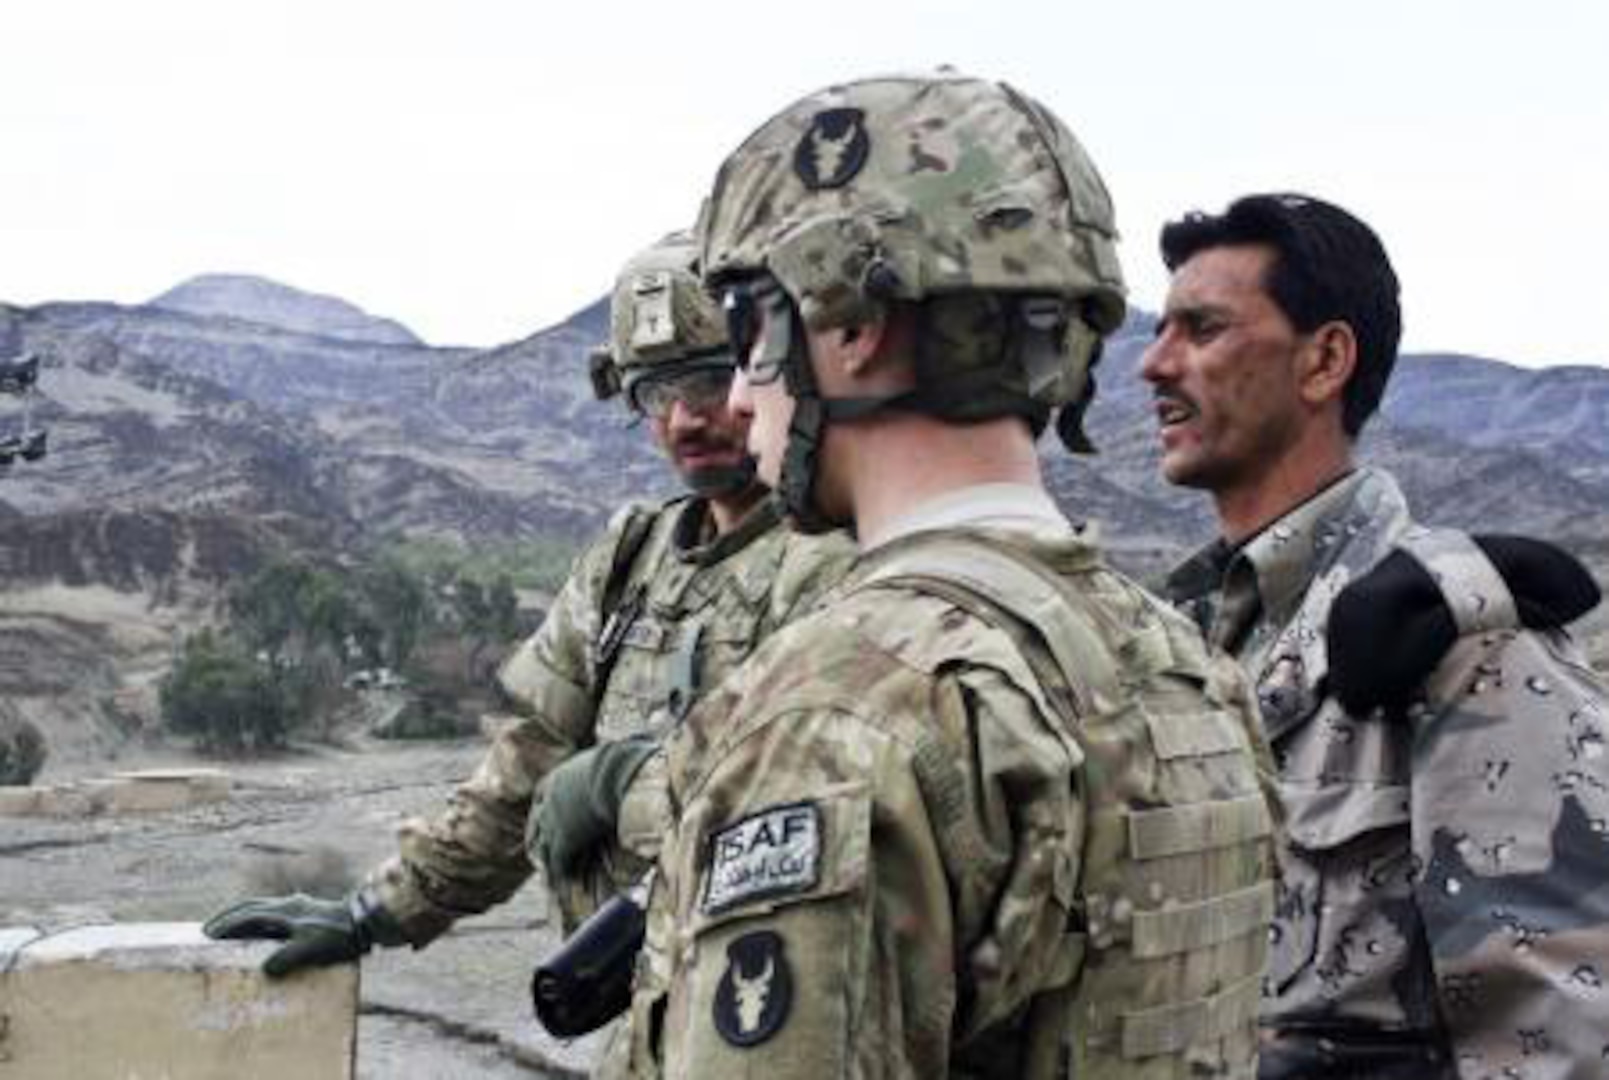 Army Spc. John Meyer and Spc. Chris Linssen, infantrymen with Company B, 1st
Battalion, 133rd Infantry Regiment, 2nd Brigade Combat Team, 34th Infantry
Division, Task Force Red Bulls, watch the pedestrian walkway with an Afghan
Border Police dog handler at Torkham Gate on the Afghanistan border March 7.